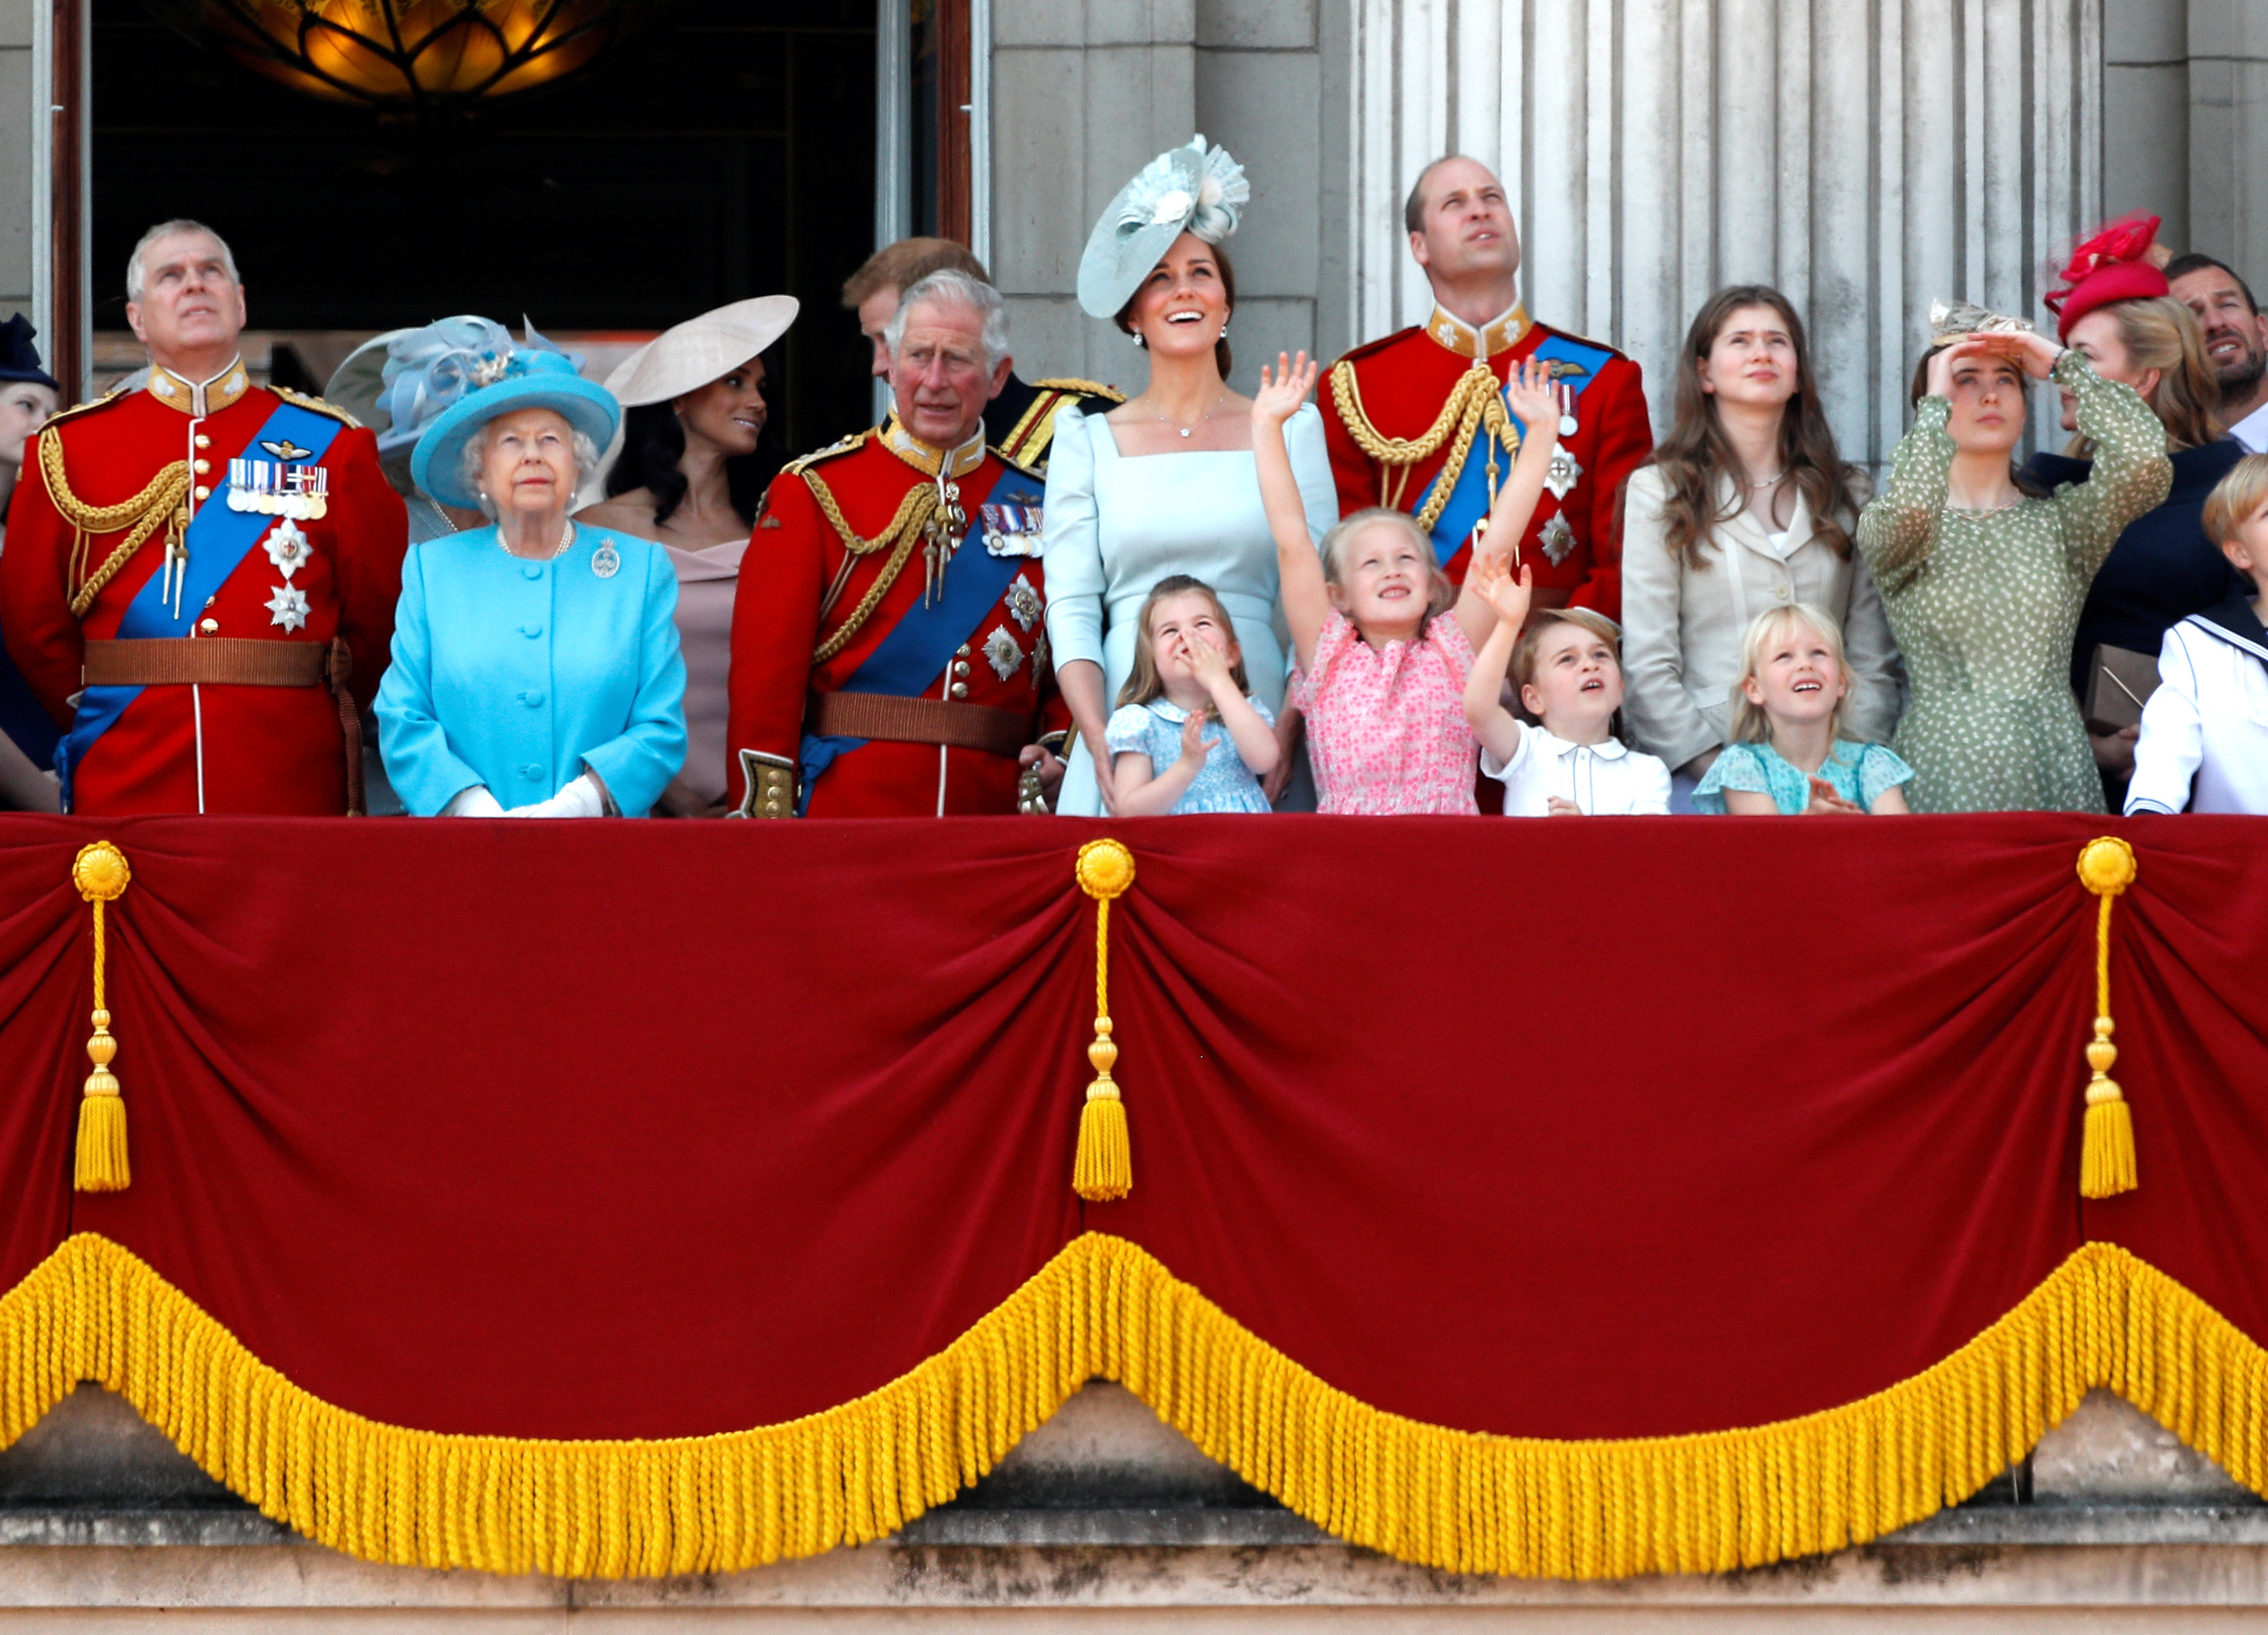 Britain's Queen Elizabeth, Prince Charles, Prince Harry and Meghan, Duchess of Sussex, Prince William and Catherine, Duchess of Cambridge, along with other members of the British royal family, look up at the RAF flypast from the balcony of Buckingham Palace as part of Trooping the Colour parade in central London, Britain, June 9, 2018. REUTERS/Peter Nicholls - RC16C8F3A7F0